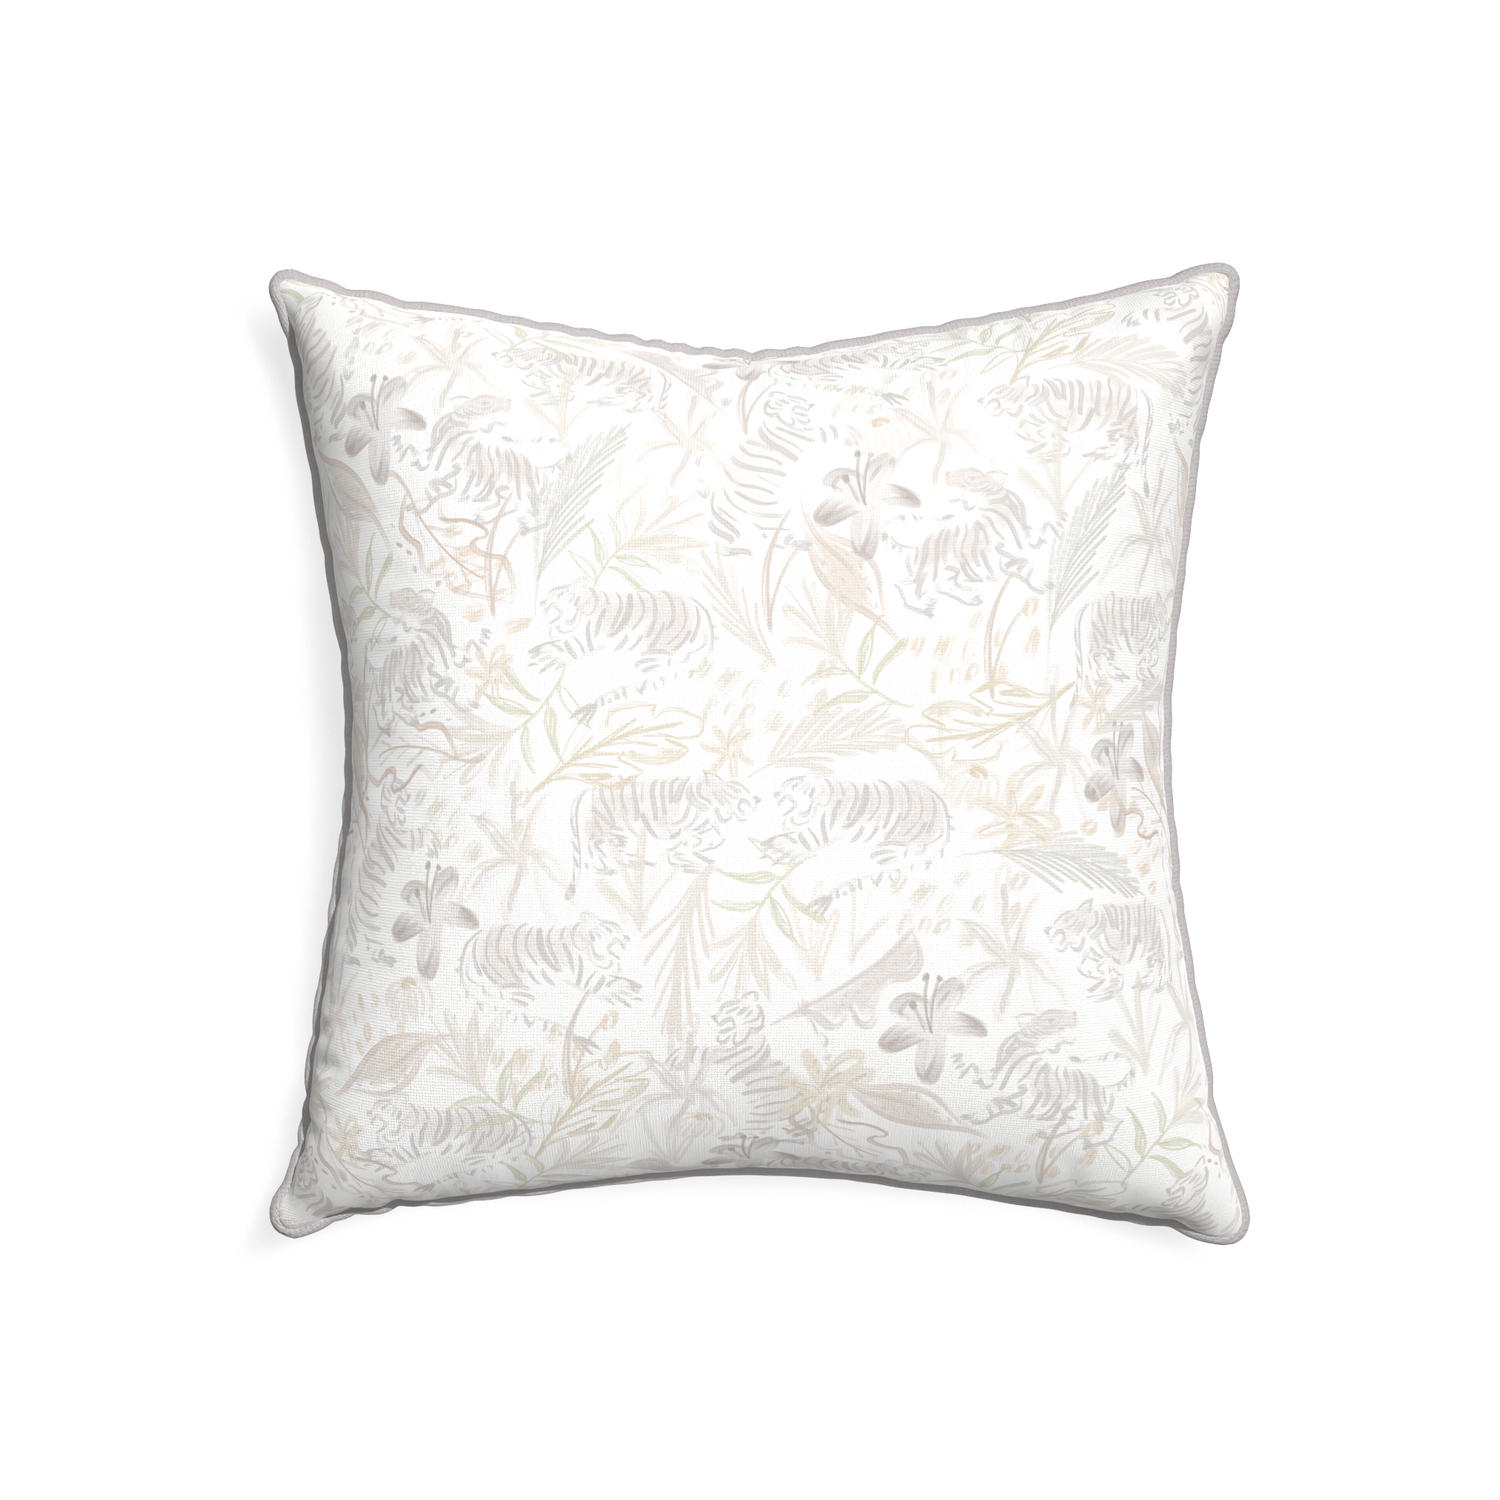 22-square frida sand custom pillow with pebble piping on white background